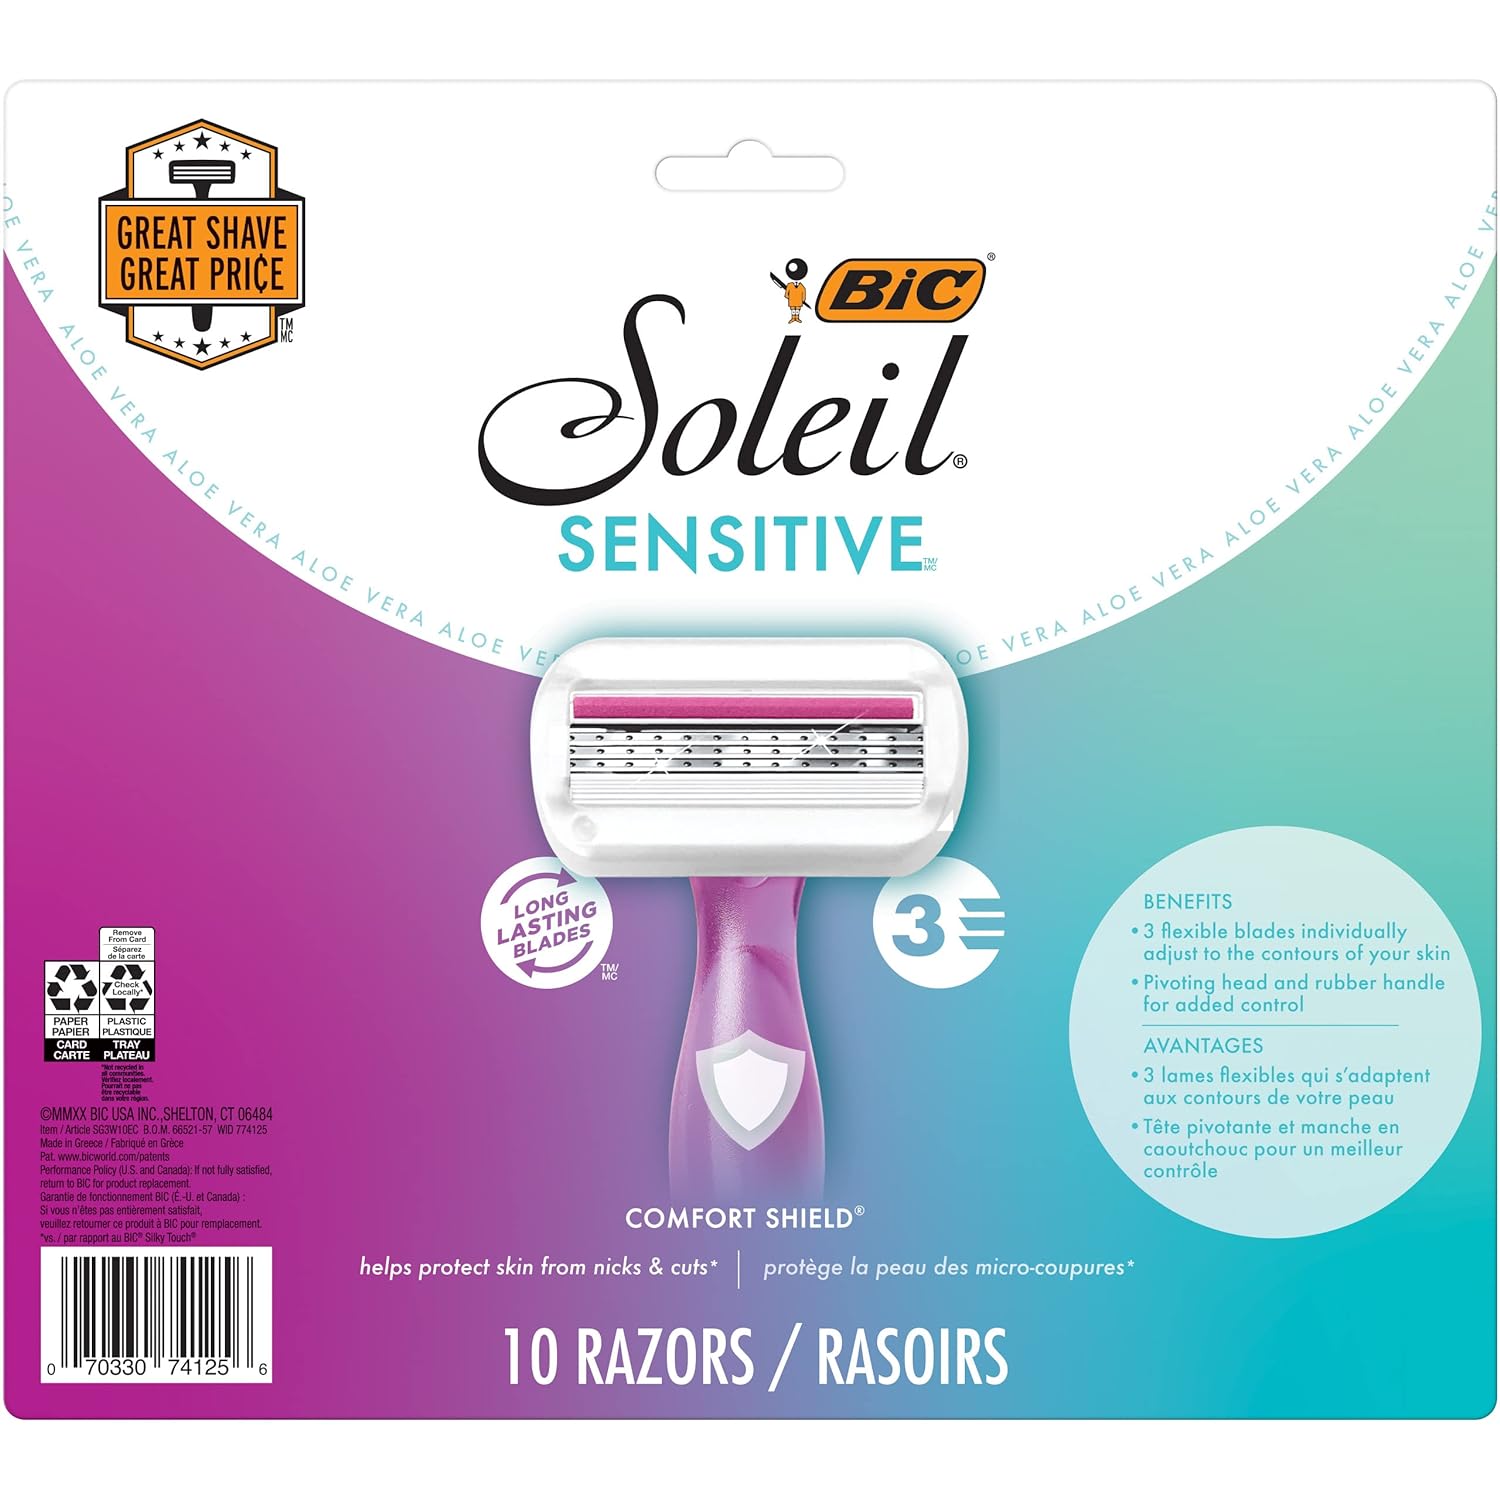 BIC Soleil Sensitive Women' Disposable Razor, Triple Blade, Count of 10 Razors, For a Close and Smooth Shave